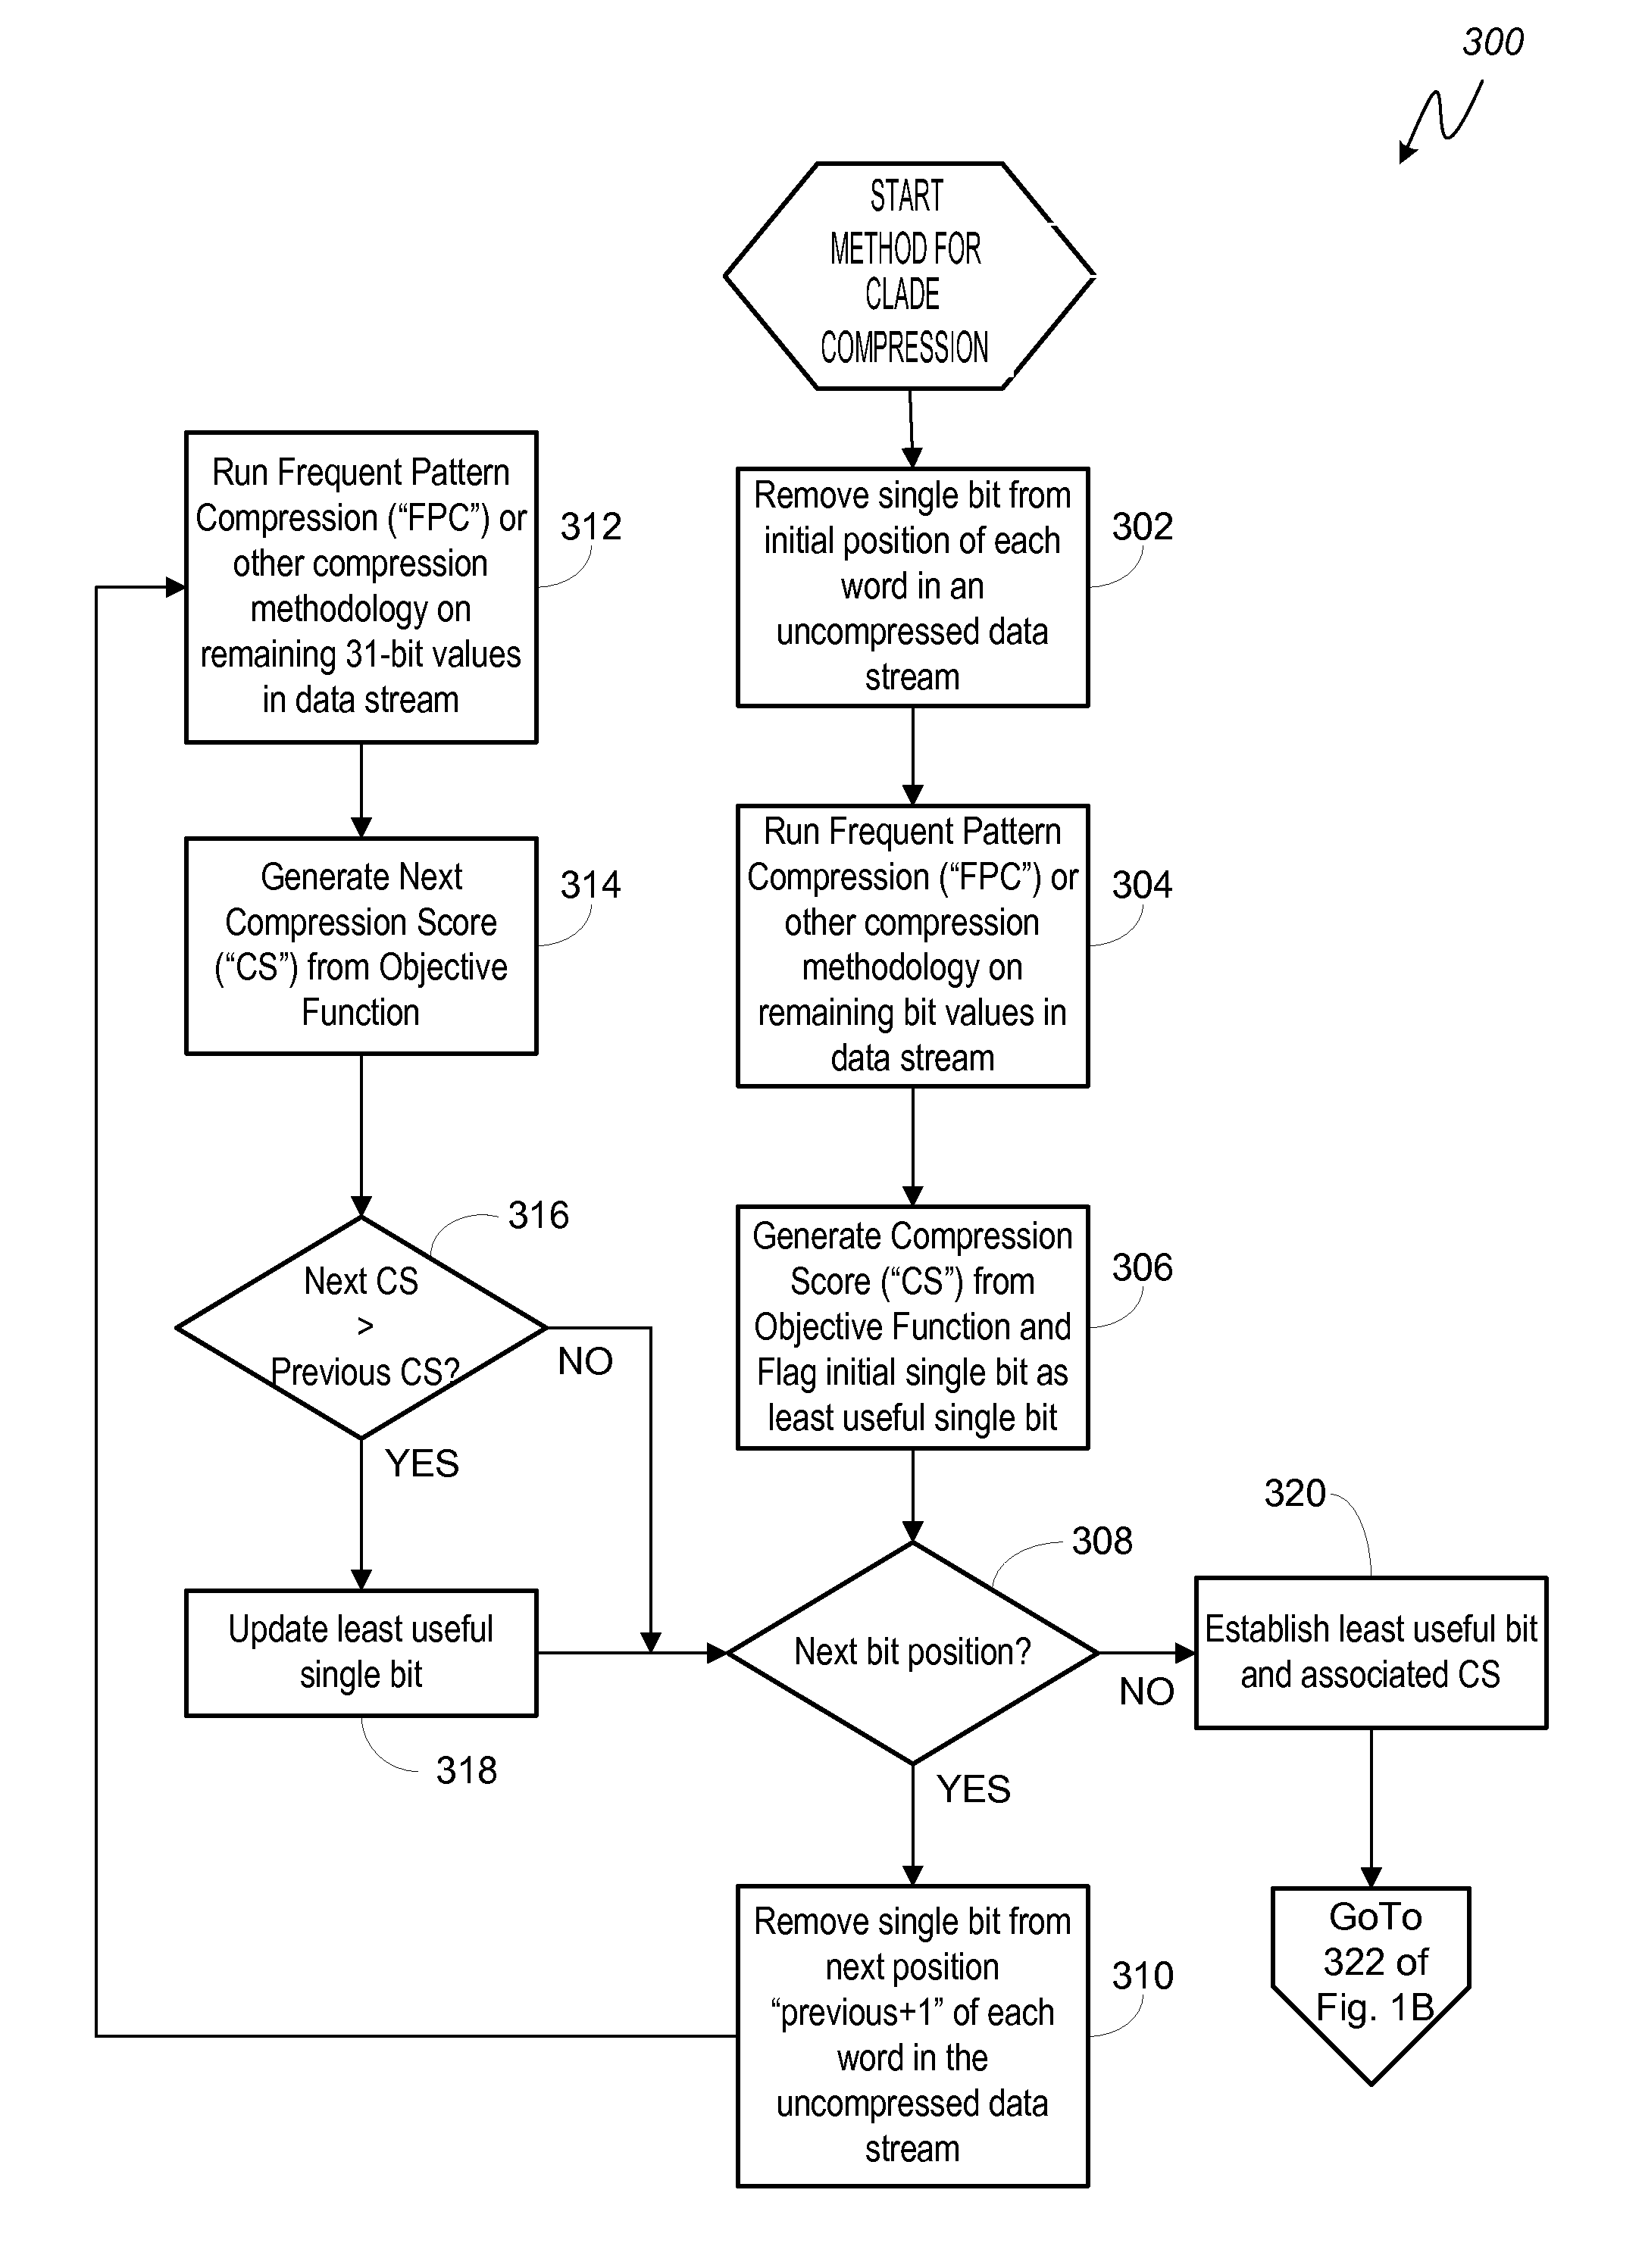 System and method for dictionary-based cache-line level code compression for on-chip memories using gradual bit removal